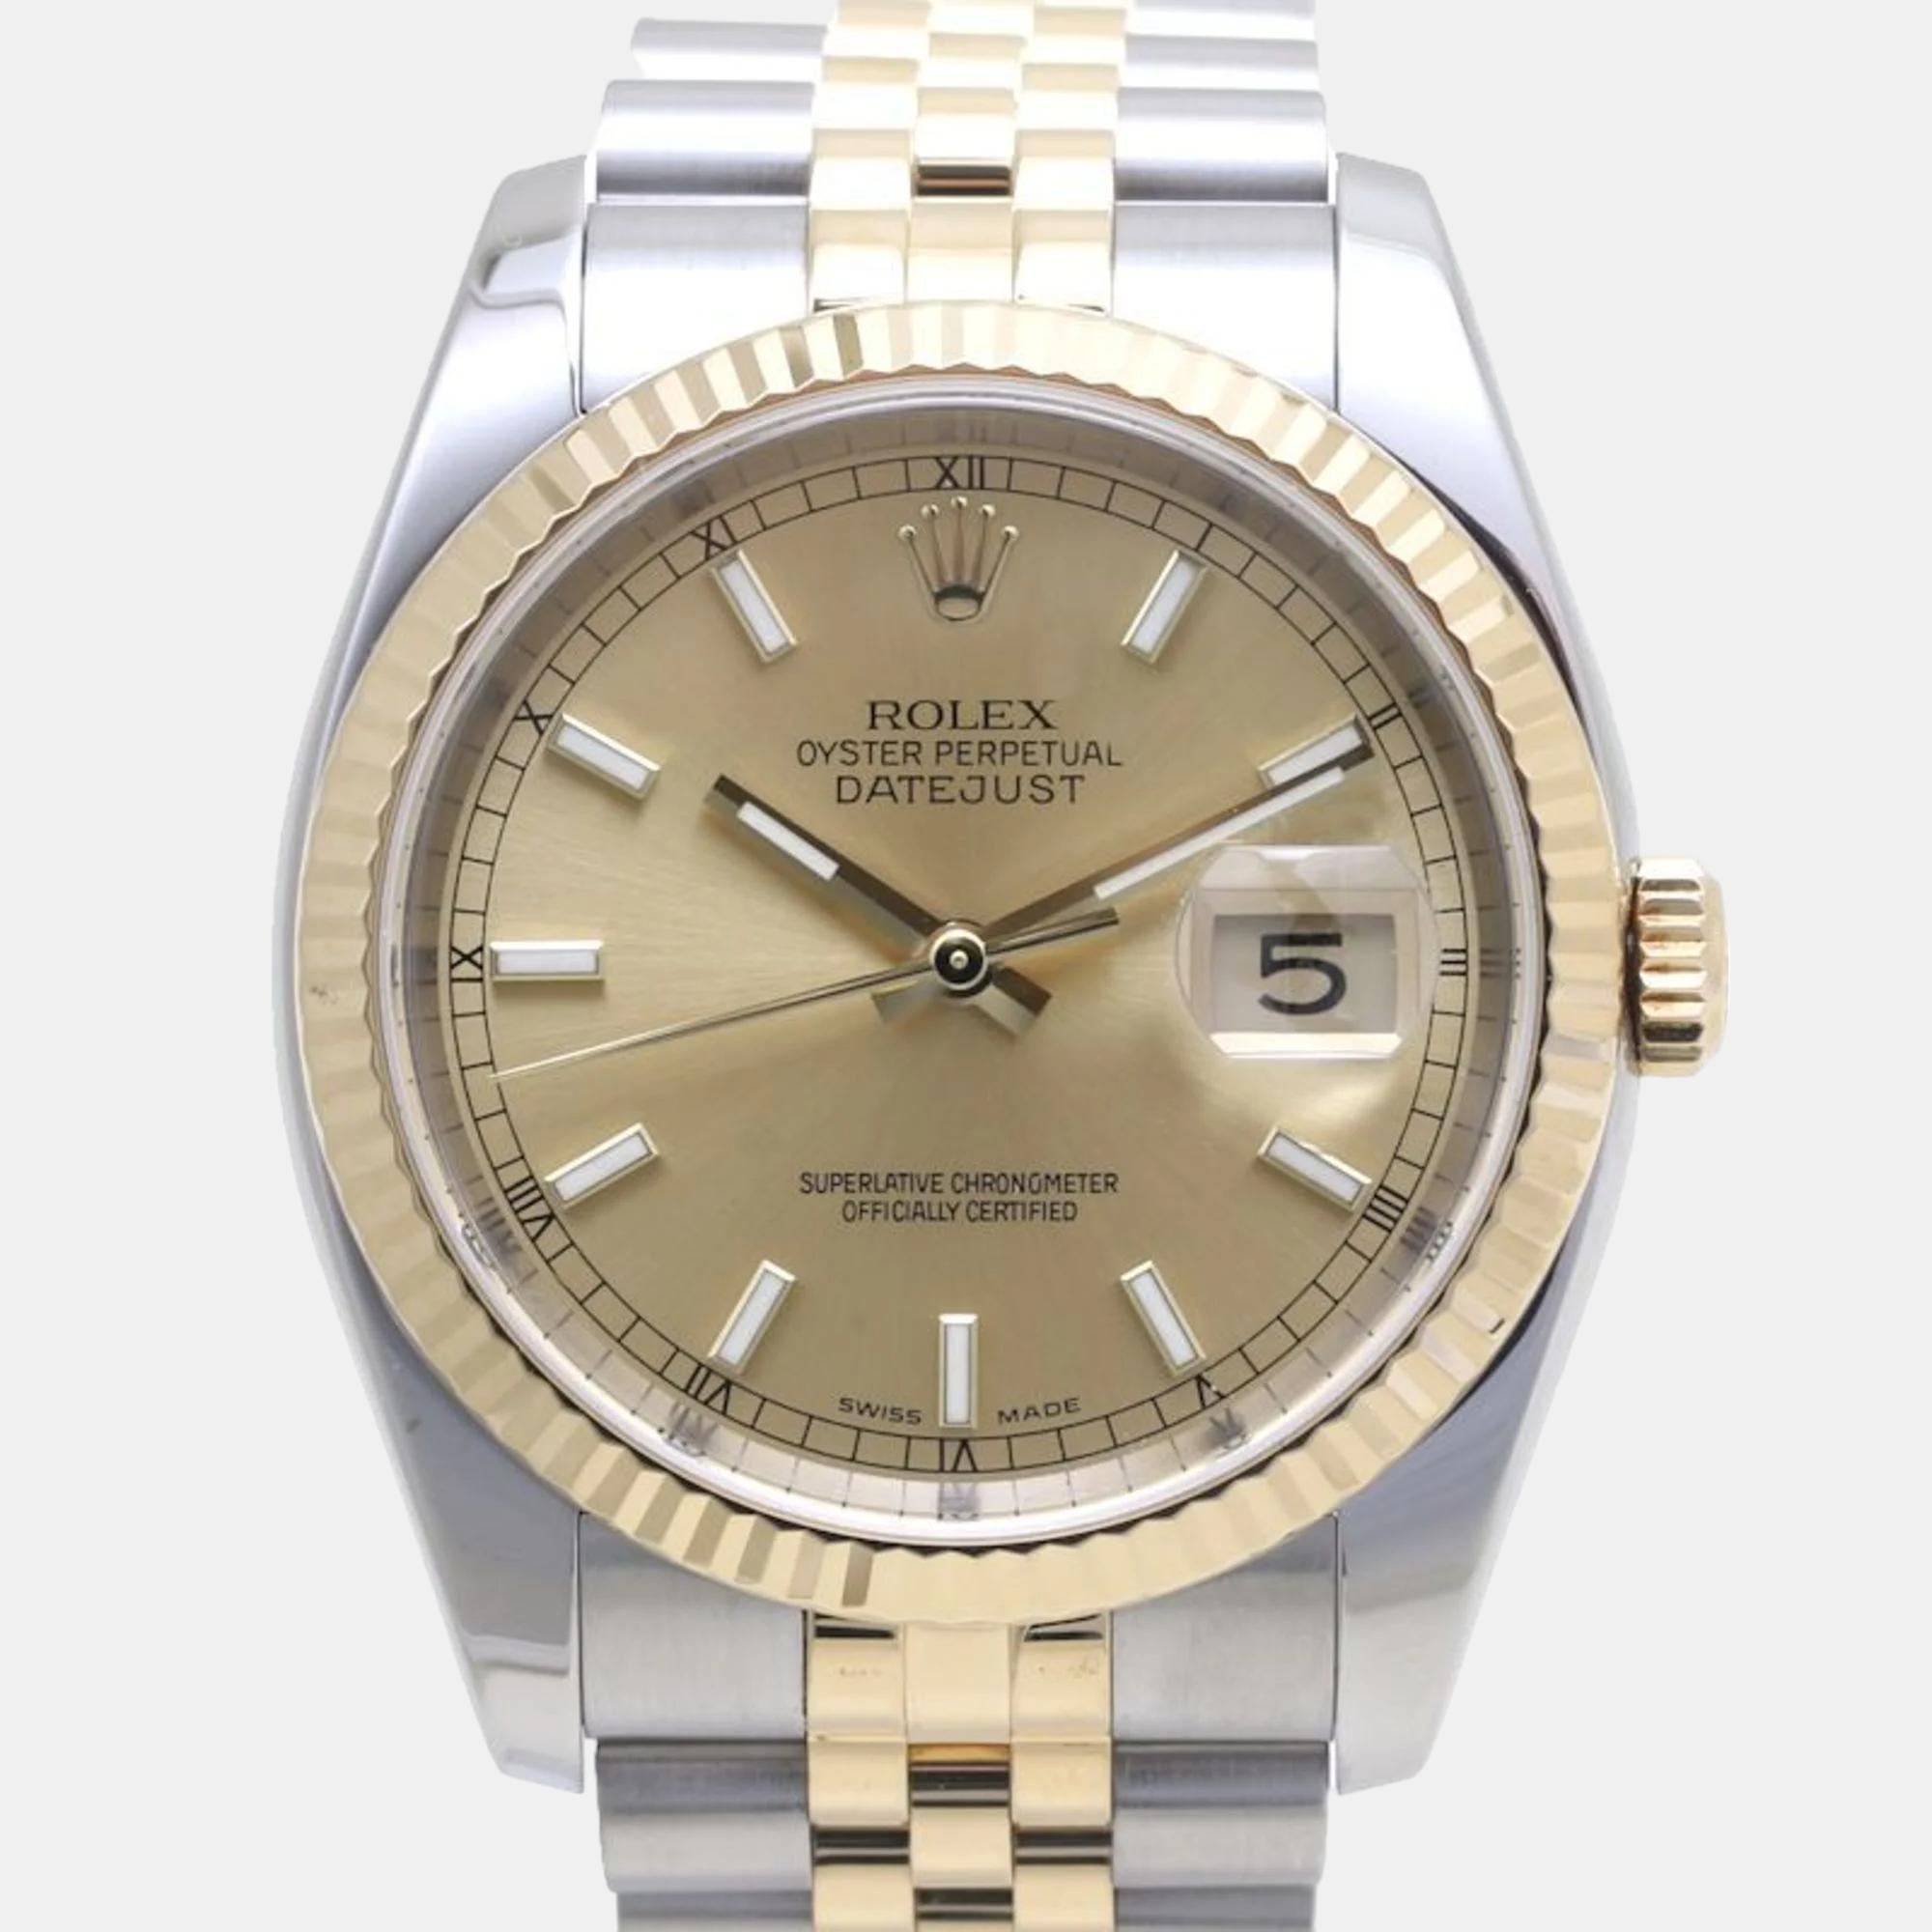 Rolex champagne 18k yellow gold stainless steel datejust 116233 automatic men's wristwatch 36 mm